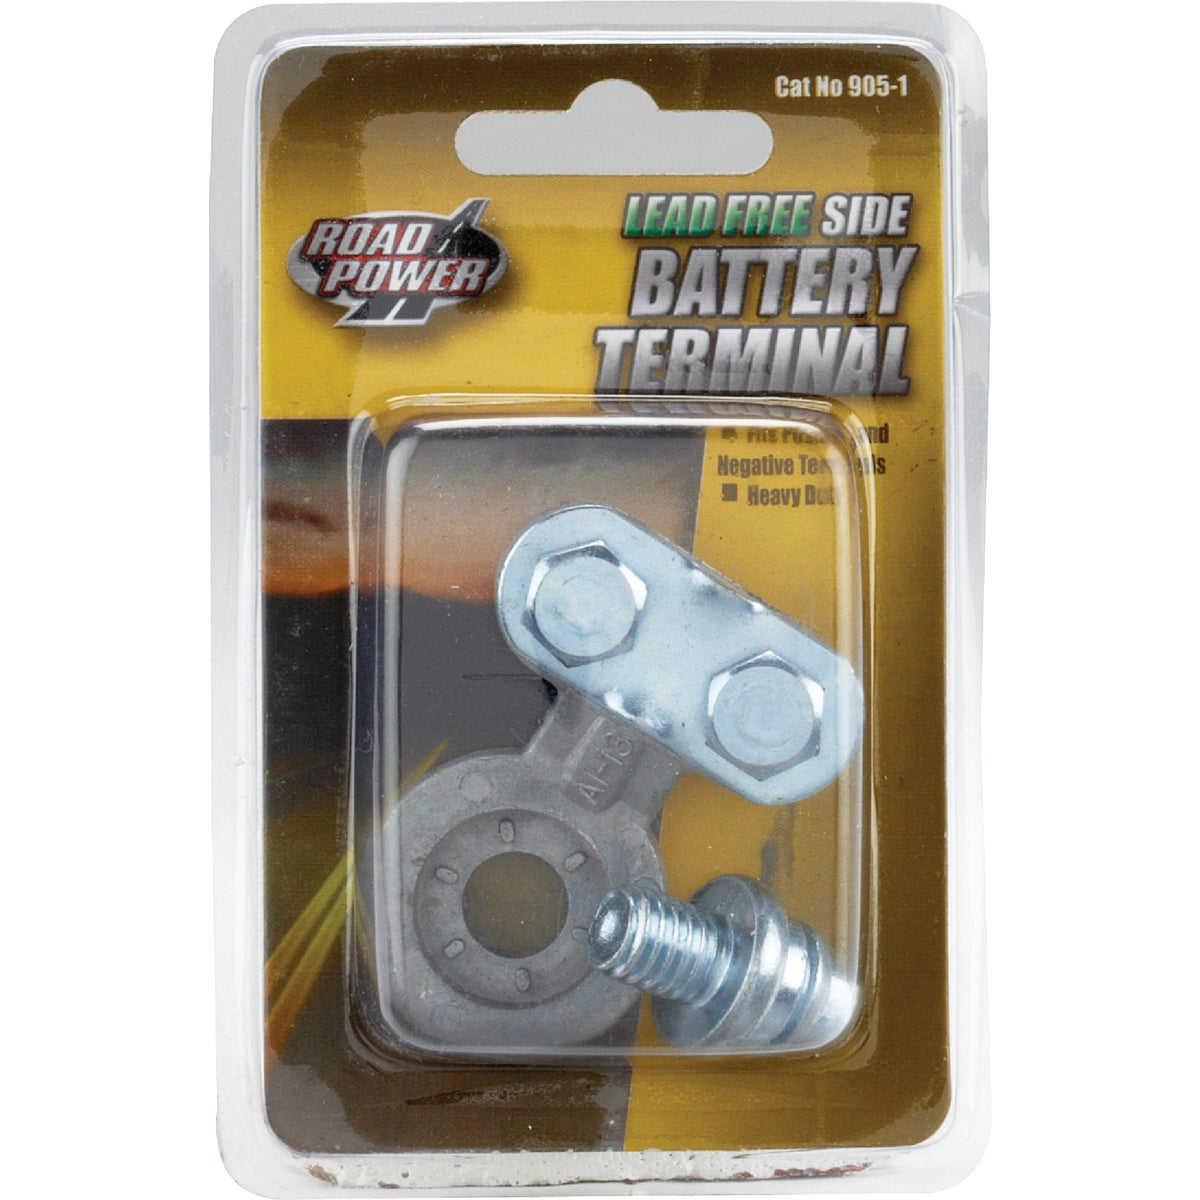  Road Power Lead-Free Side Post Battery Terminal